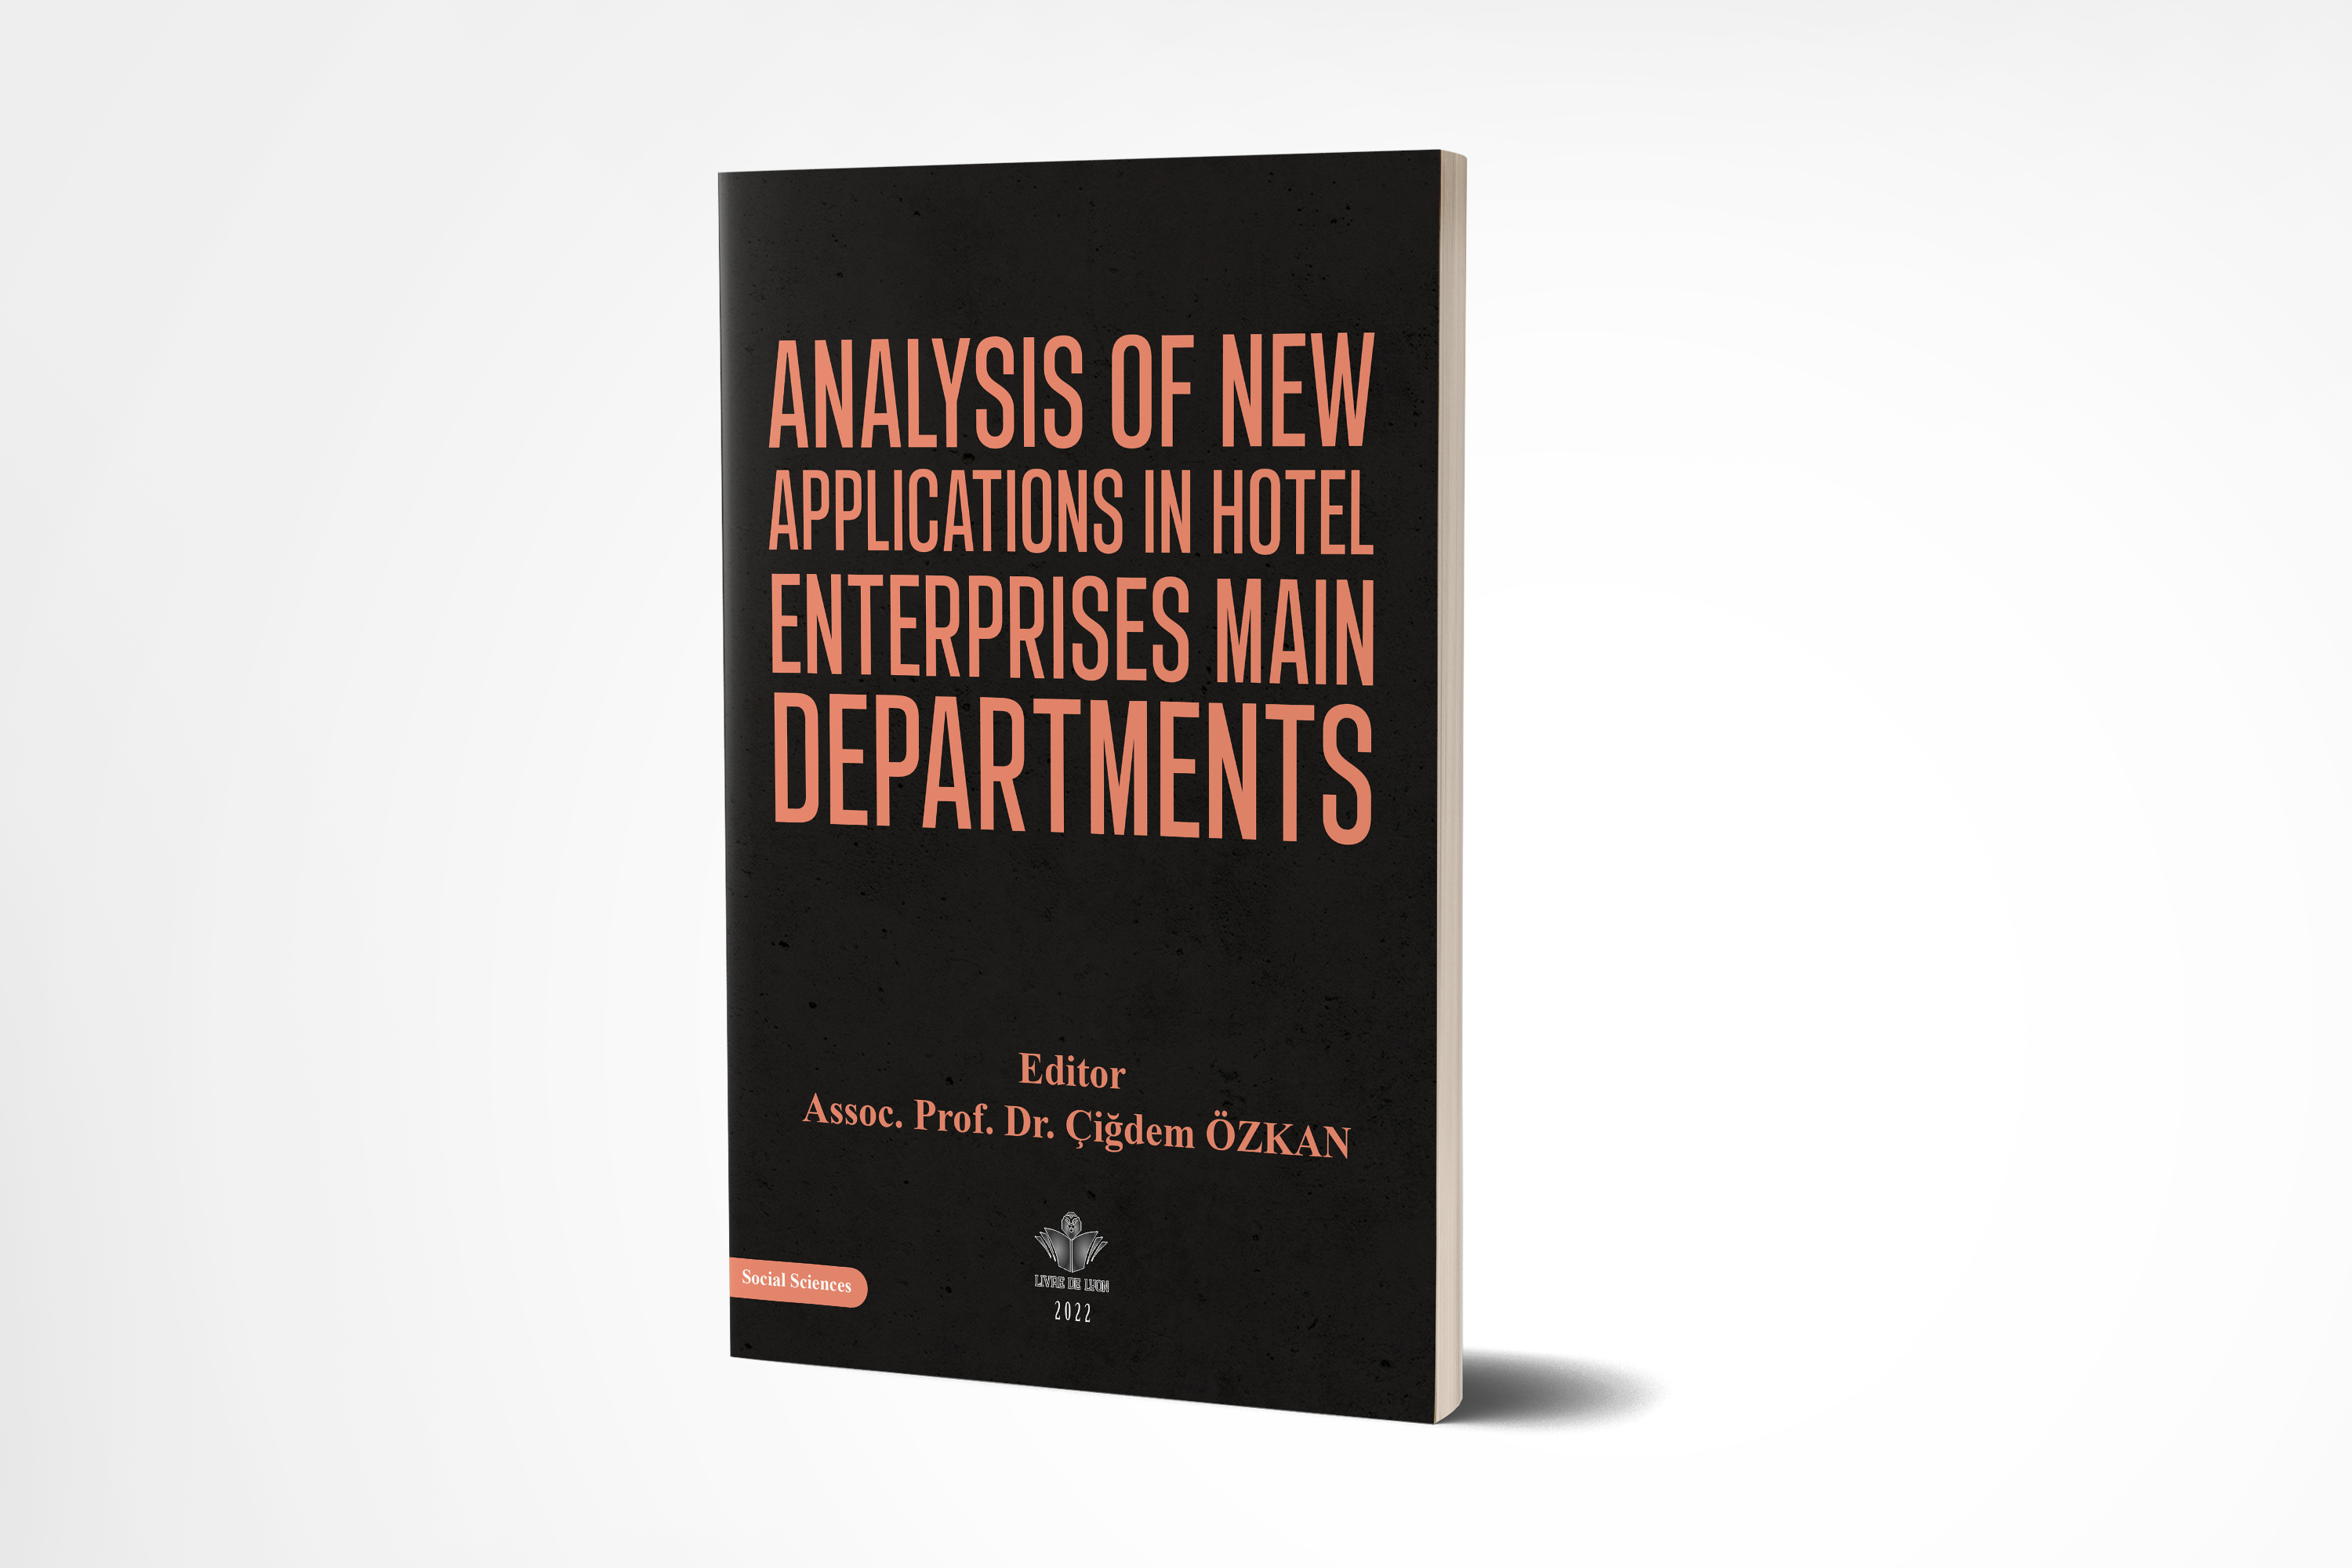 Analysis of New Applications in Hotel Enterprises Main Departments